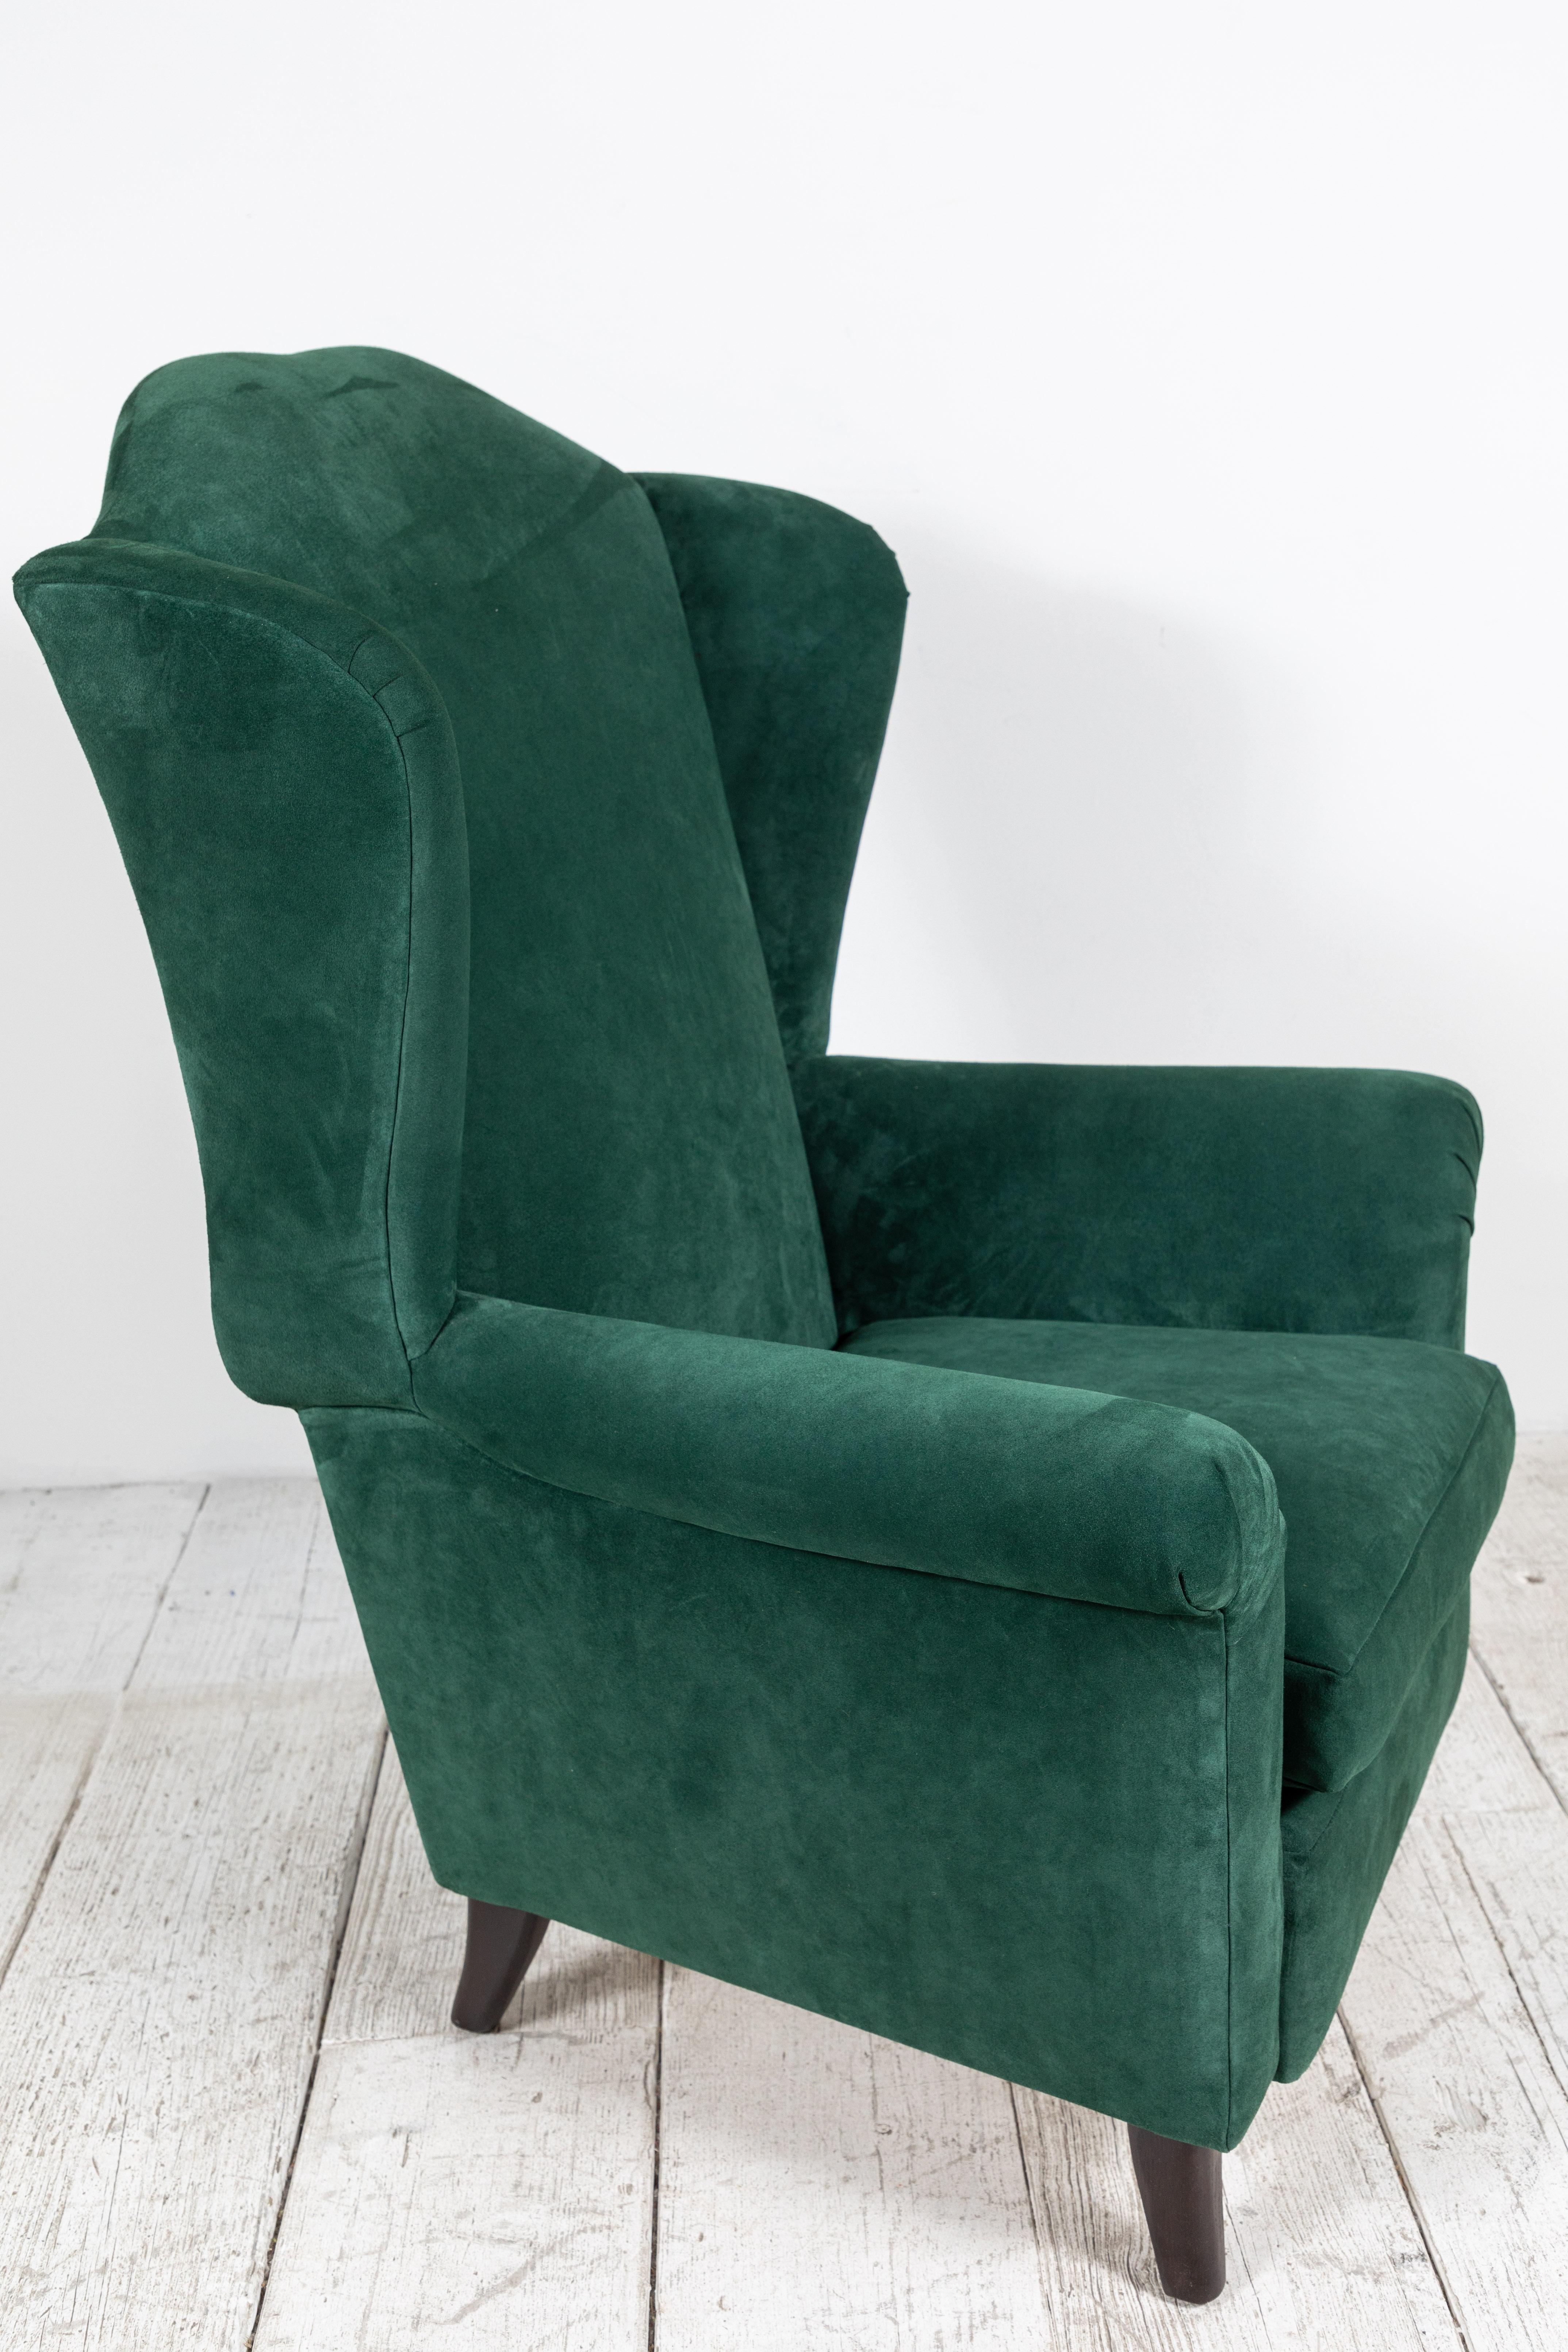 green wing back chair